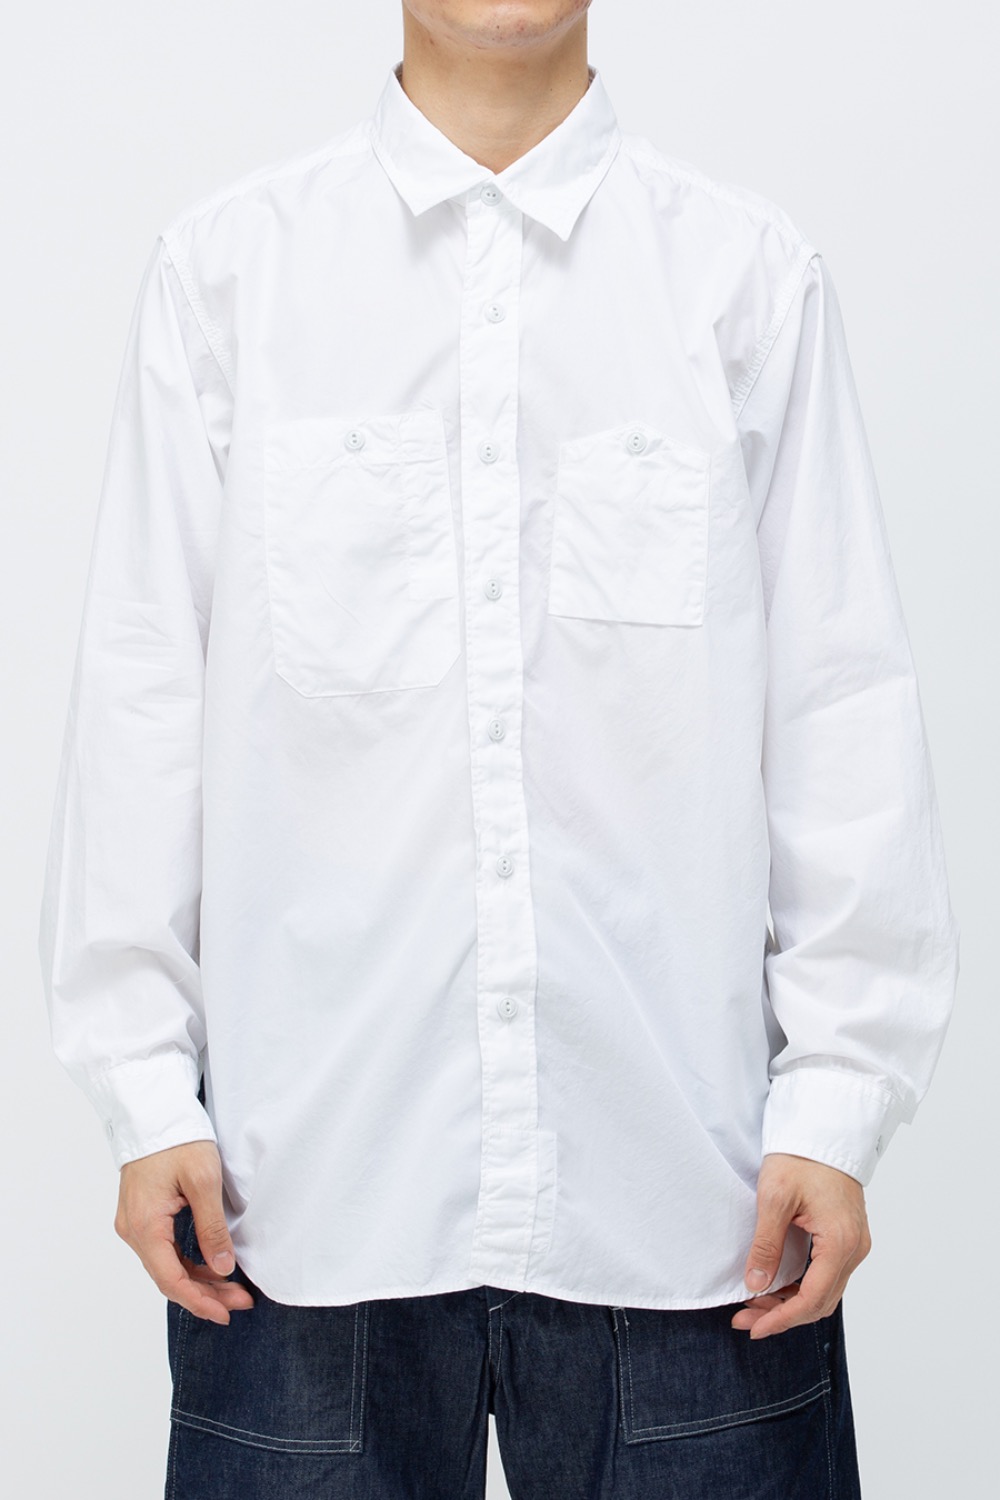 WORK SHIRT 100&#039;s 2PLY BROADCLOTH WHITE